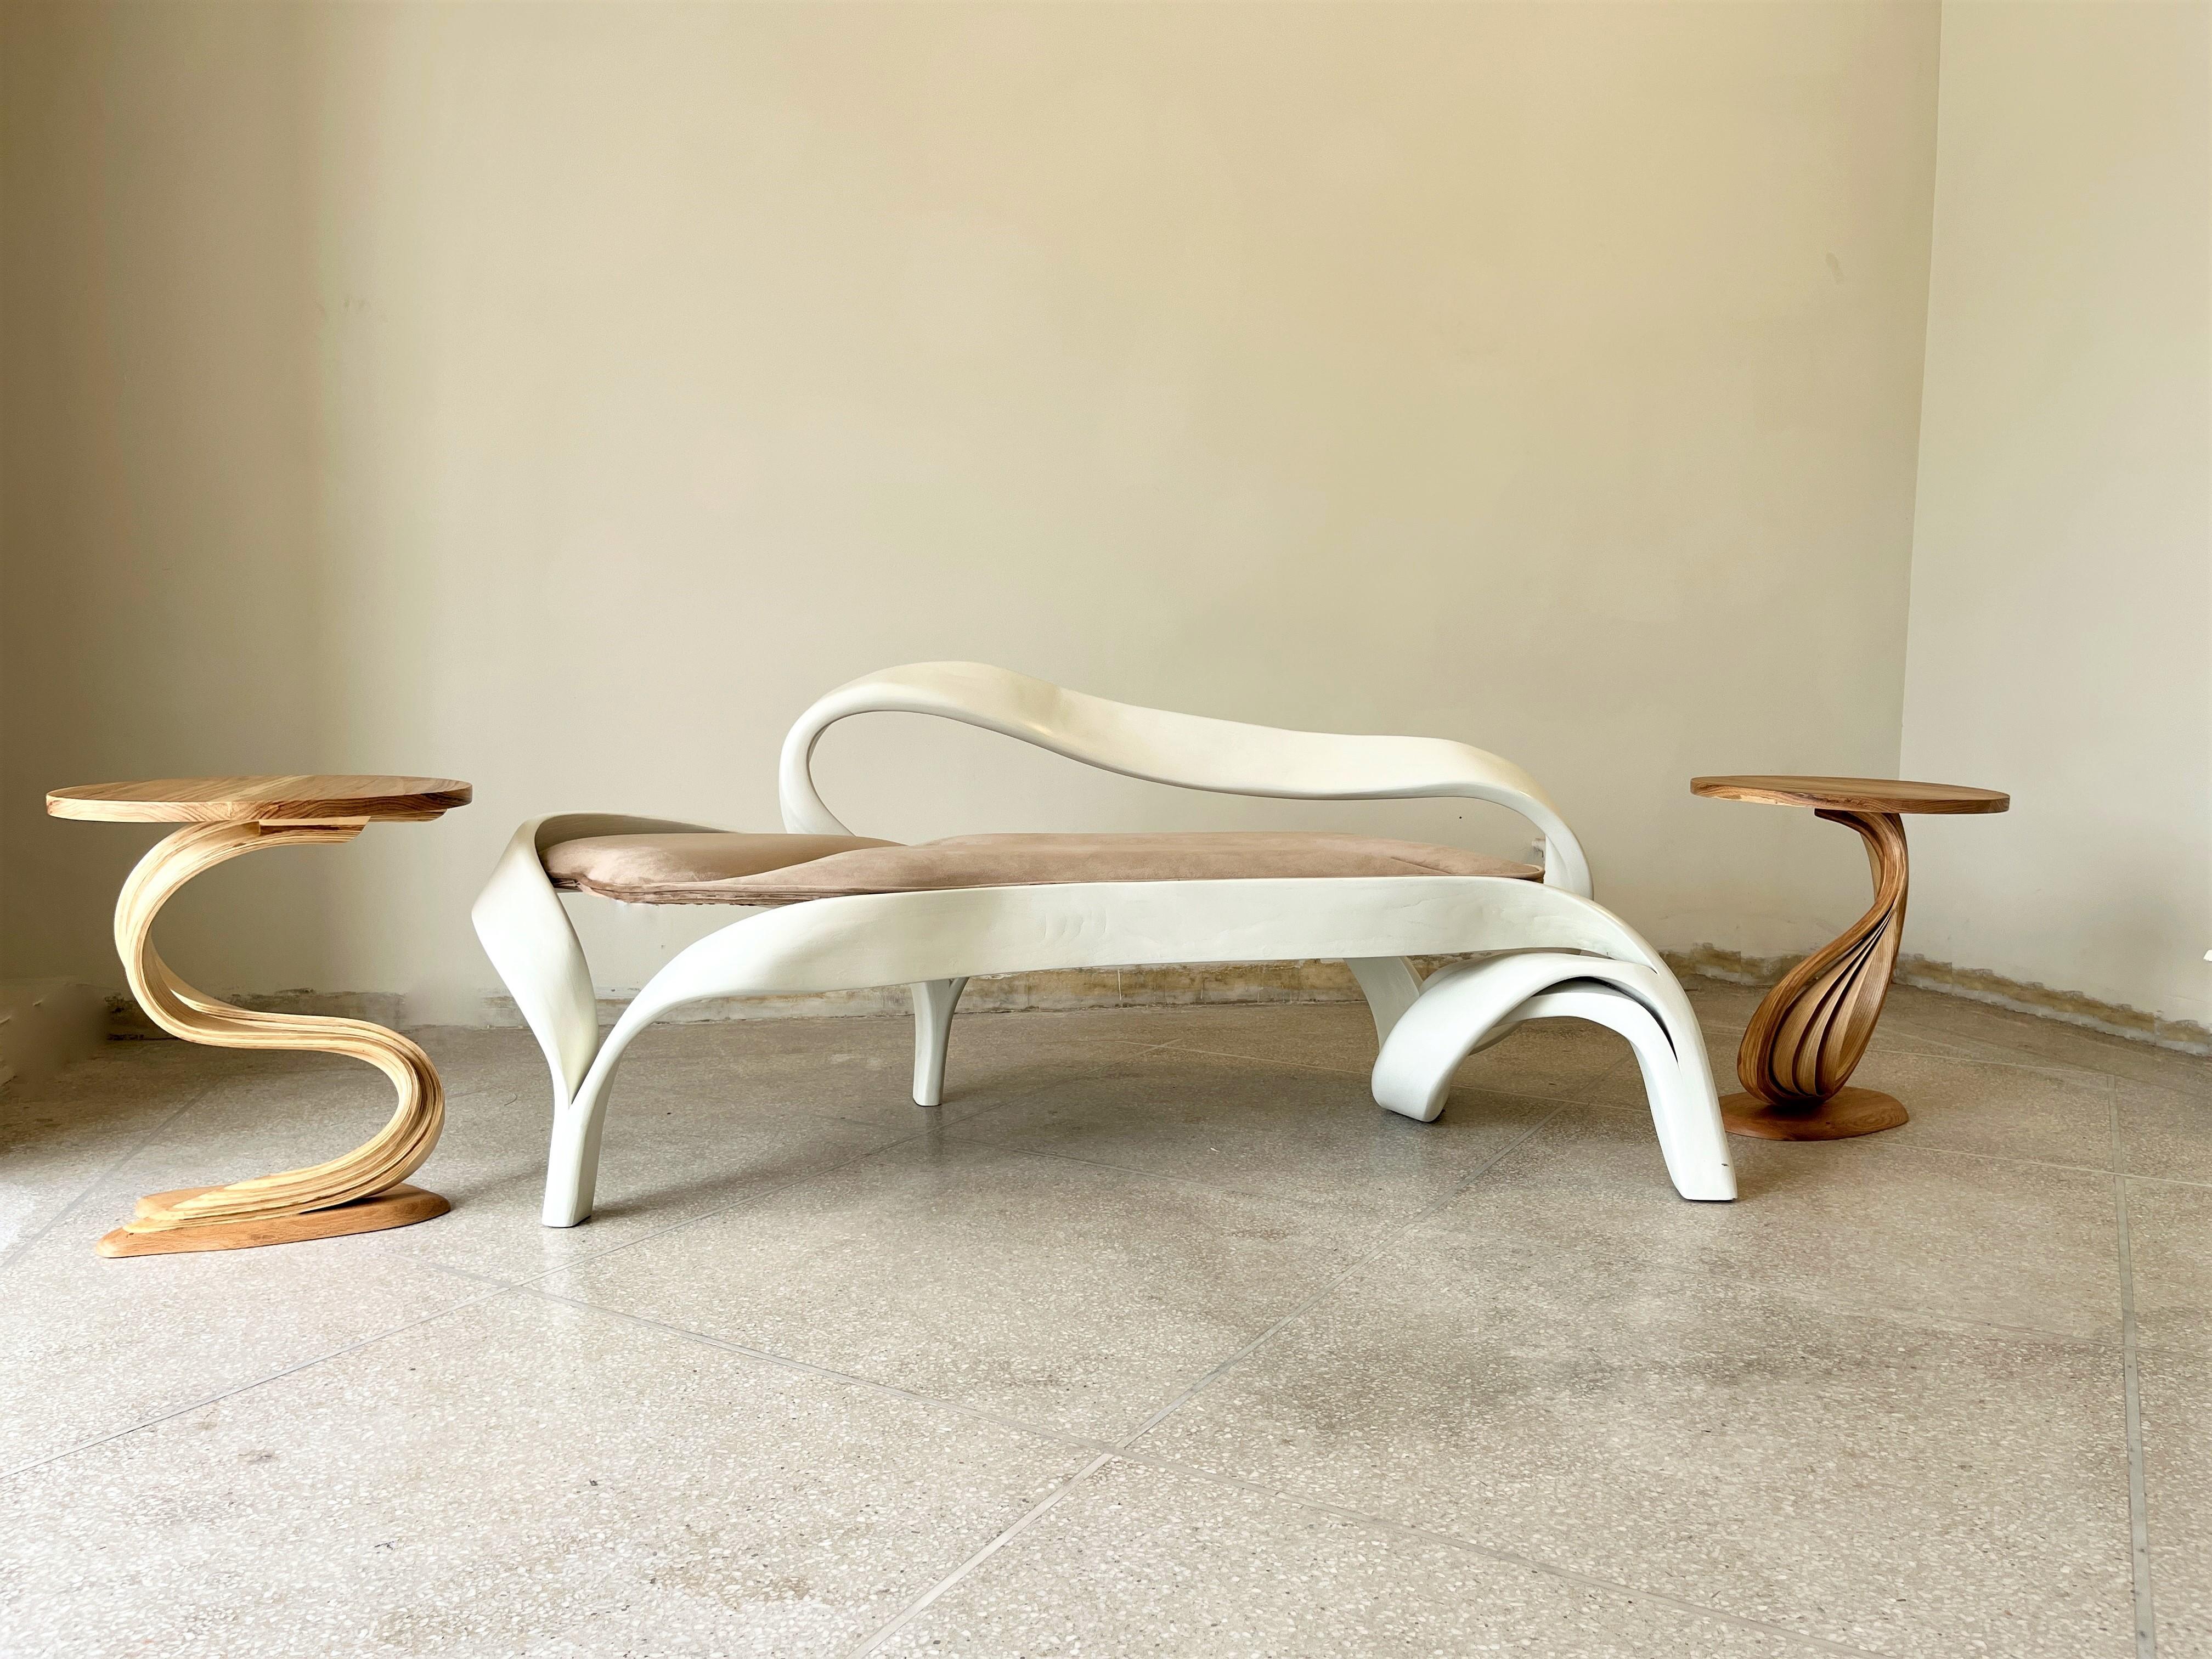 Two Seater No. 3 - Fluentum Series by Raka Studio in Ash Wood and Velvet In New Condition For Sale In Cape Girardeau, MO